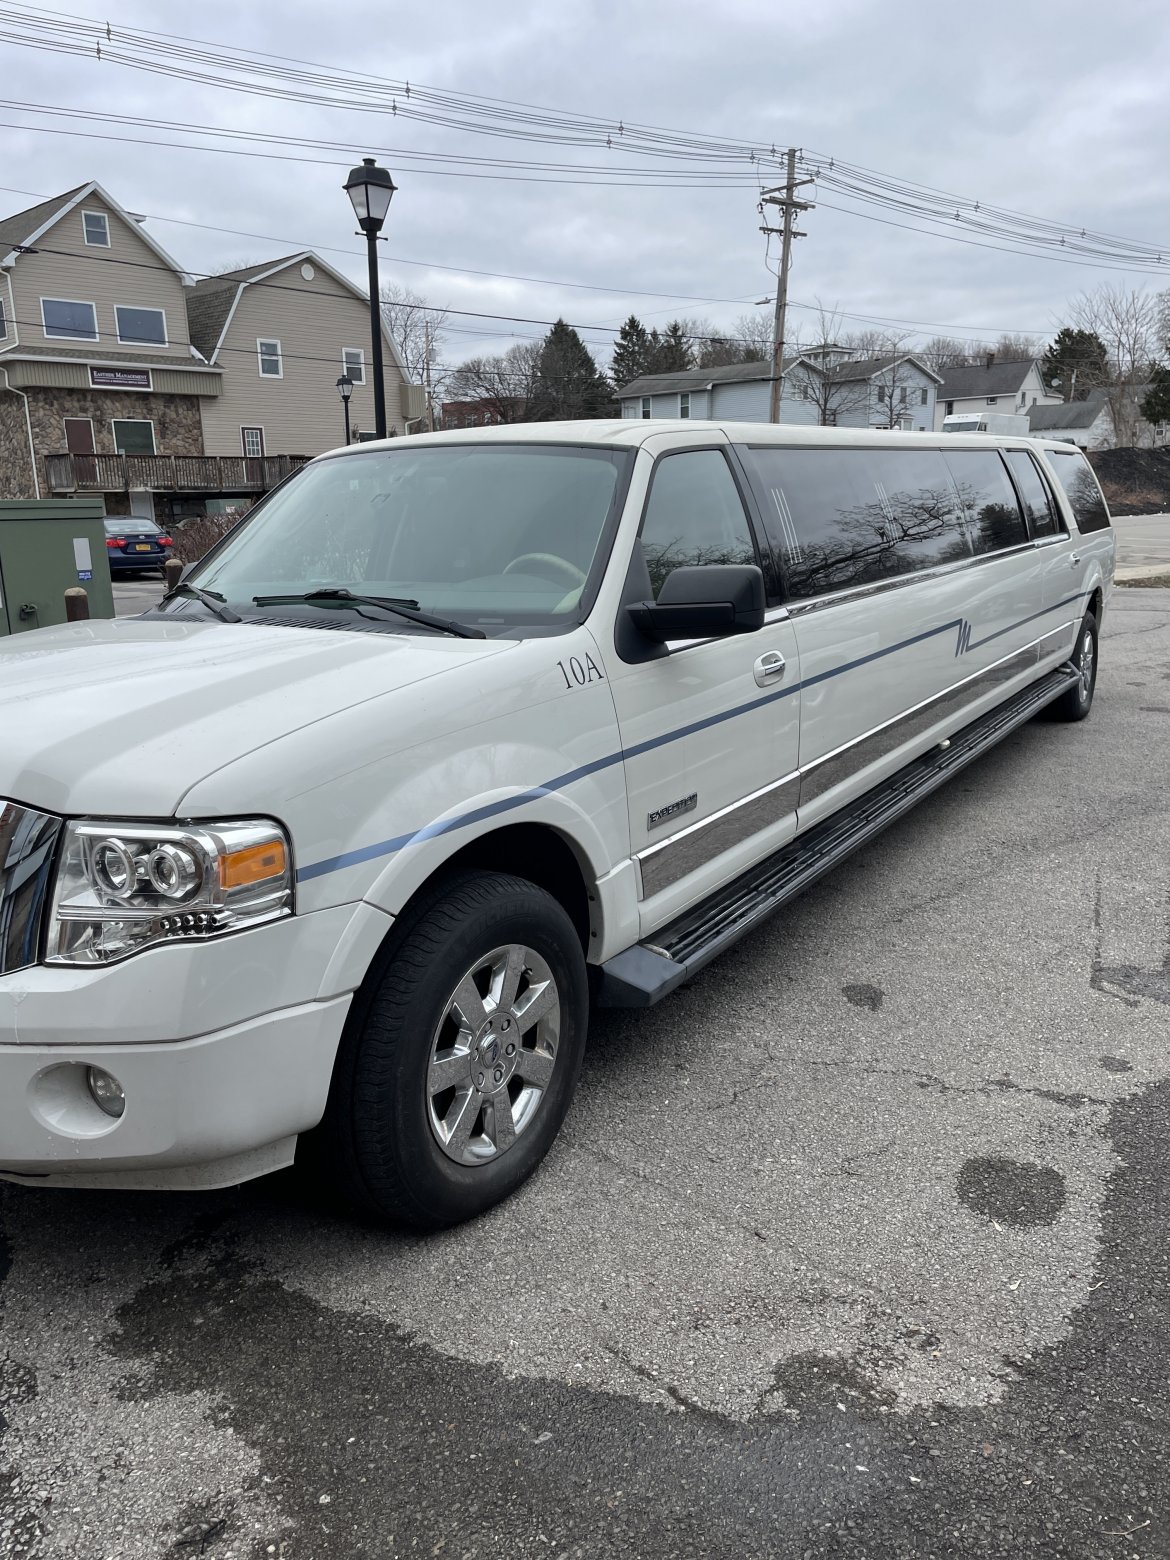 SUV Stretch for sale: 2008 Ford Expedition 140&quot; by Executive Coach Builders